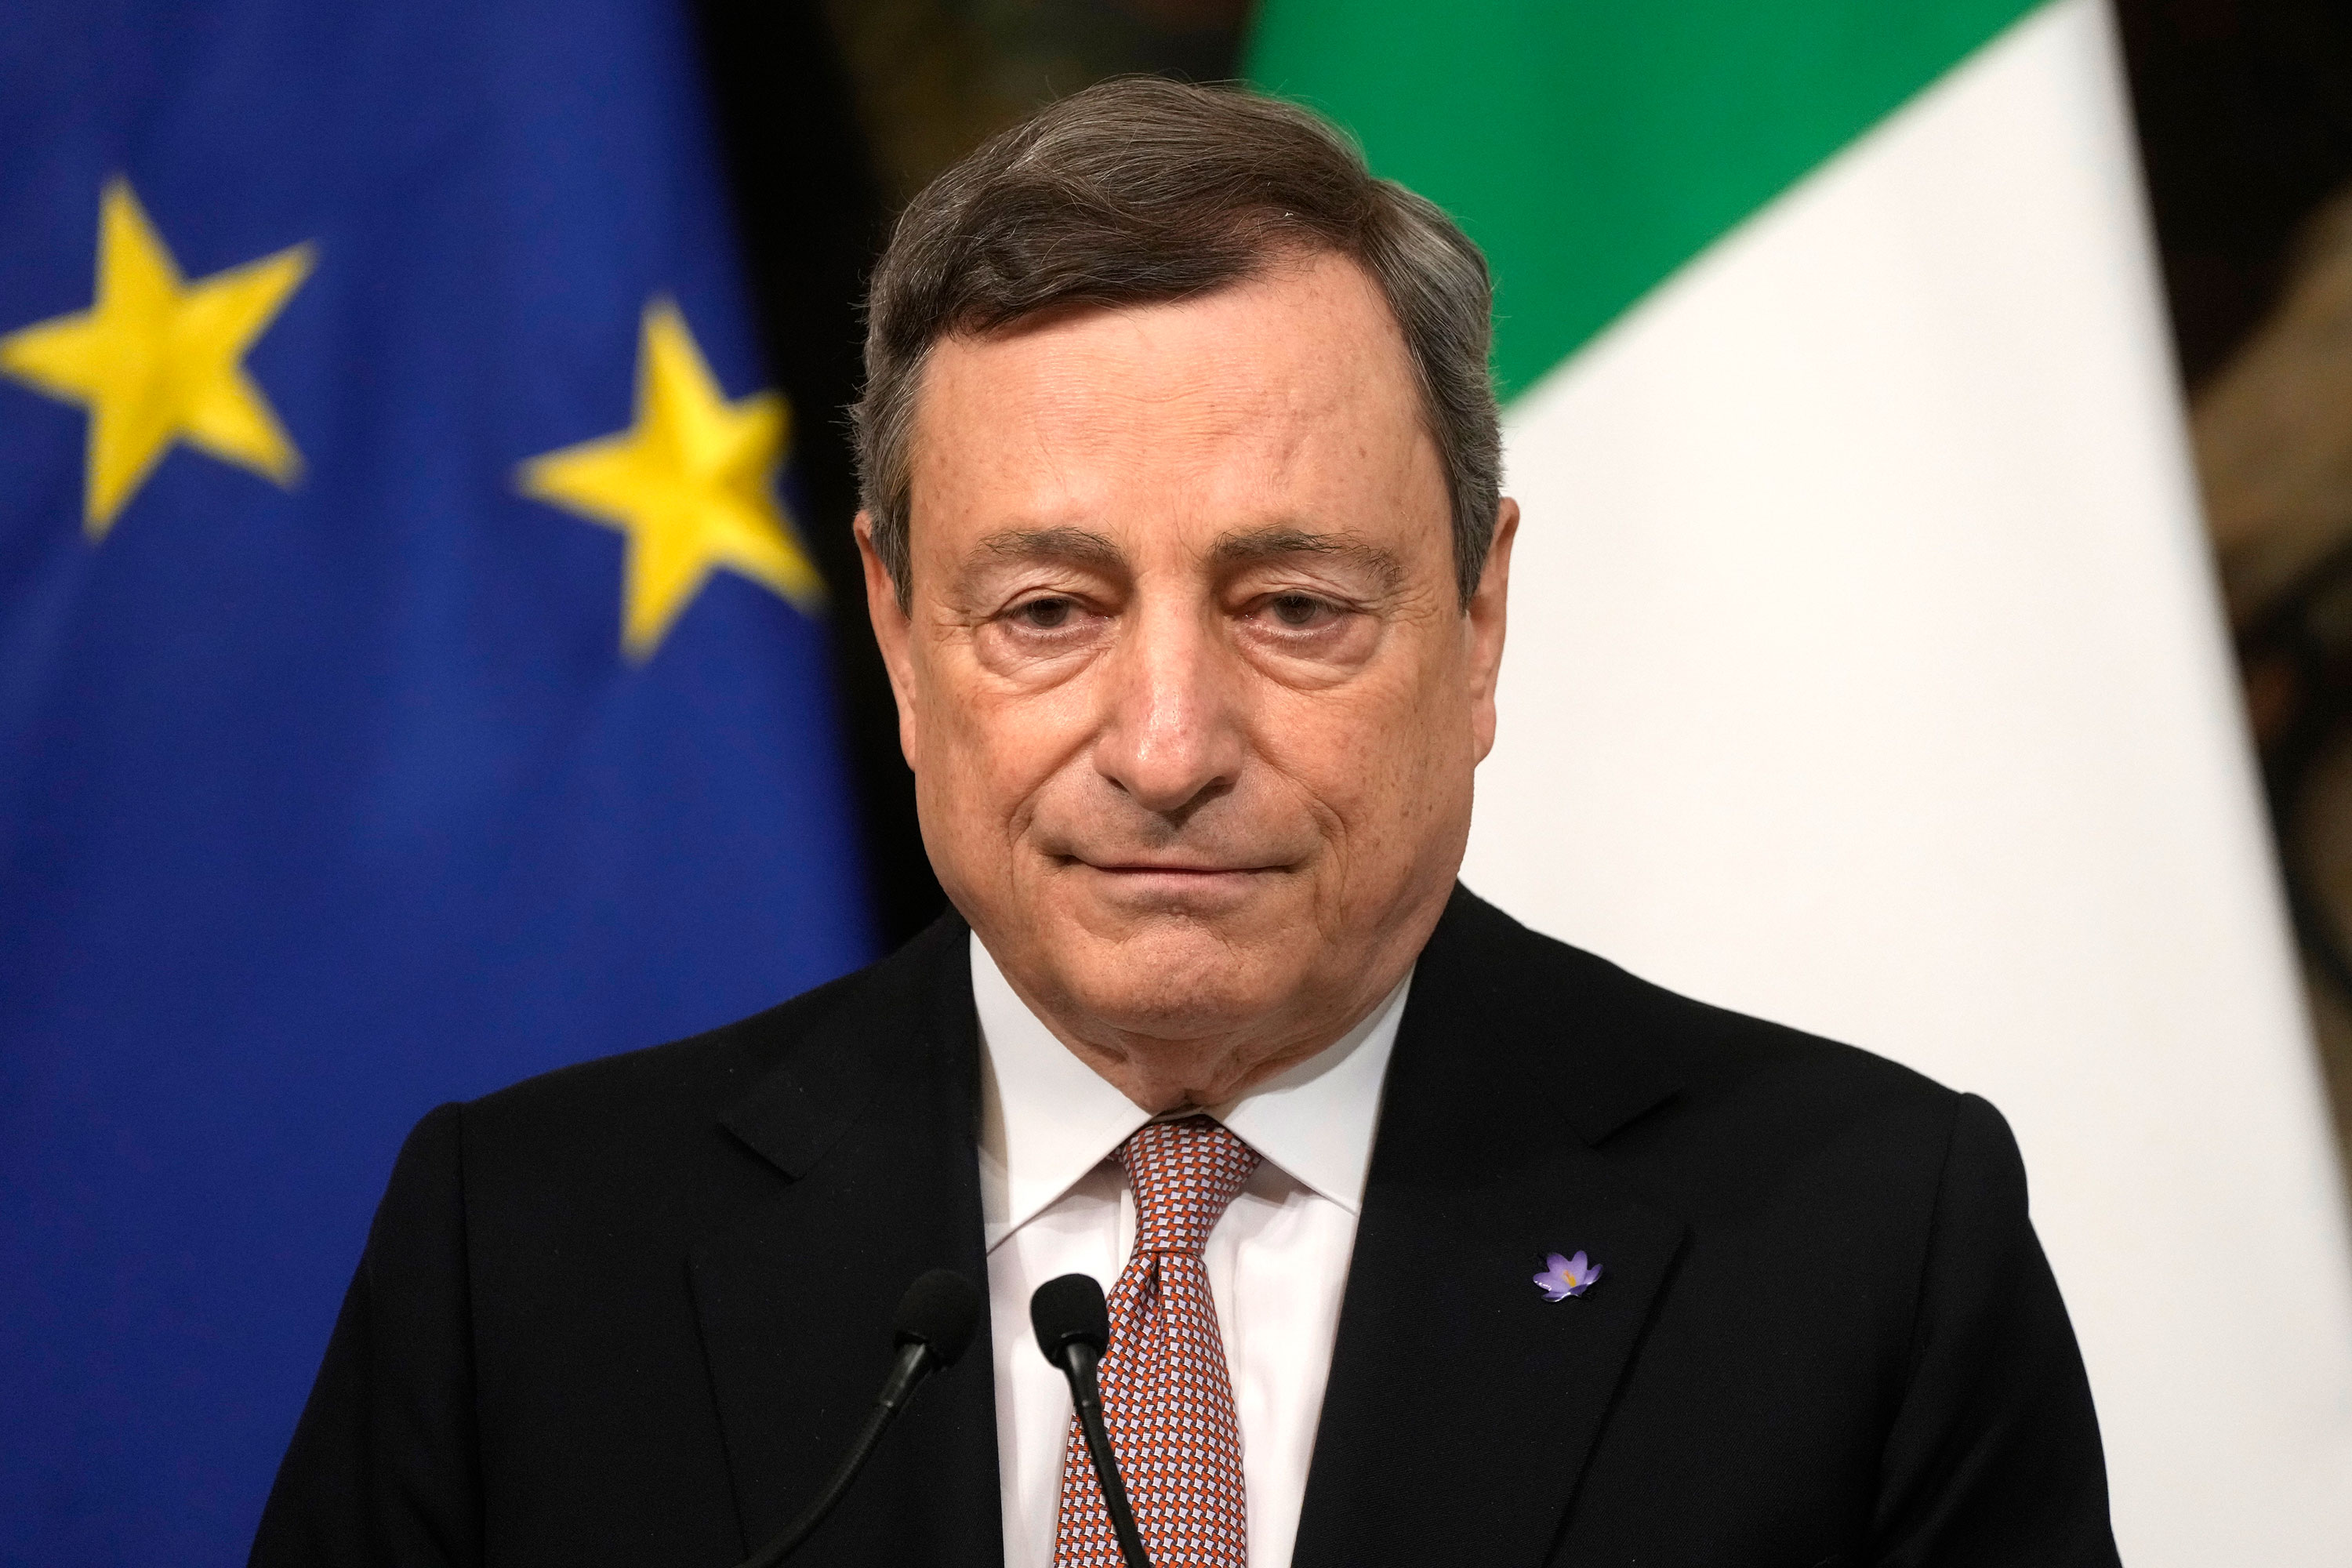 Italian Prime Minister Mario Draghi listens to a question during a press conference in Rome on Thursday.